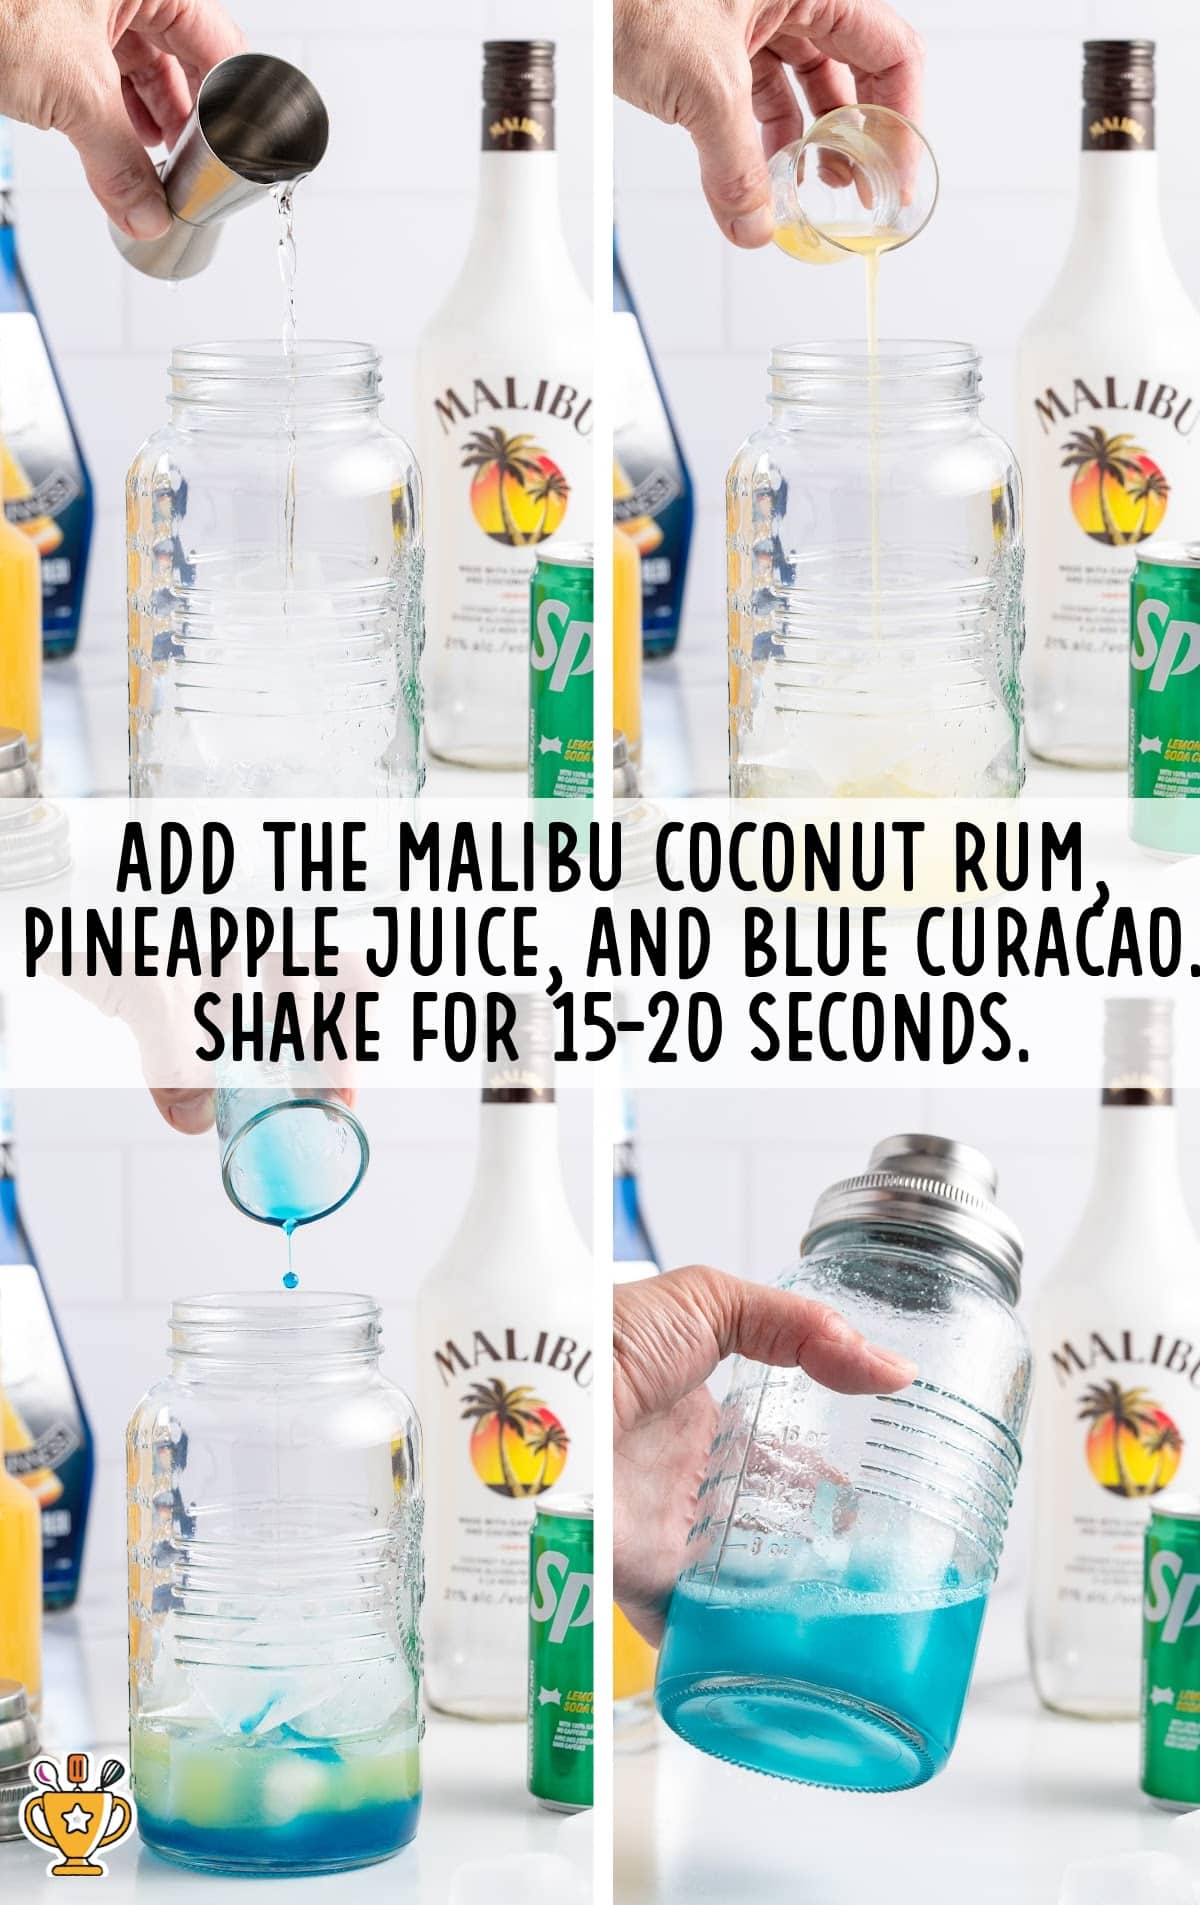 malibu coconut rum, pineapple juice, and blue curacao added to the glass